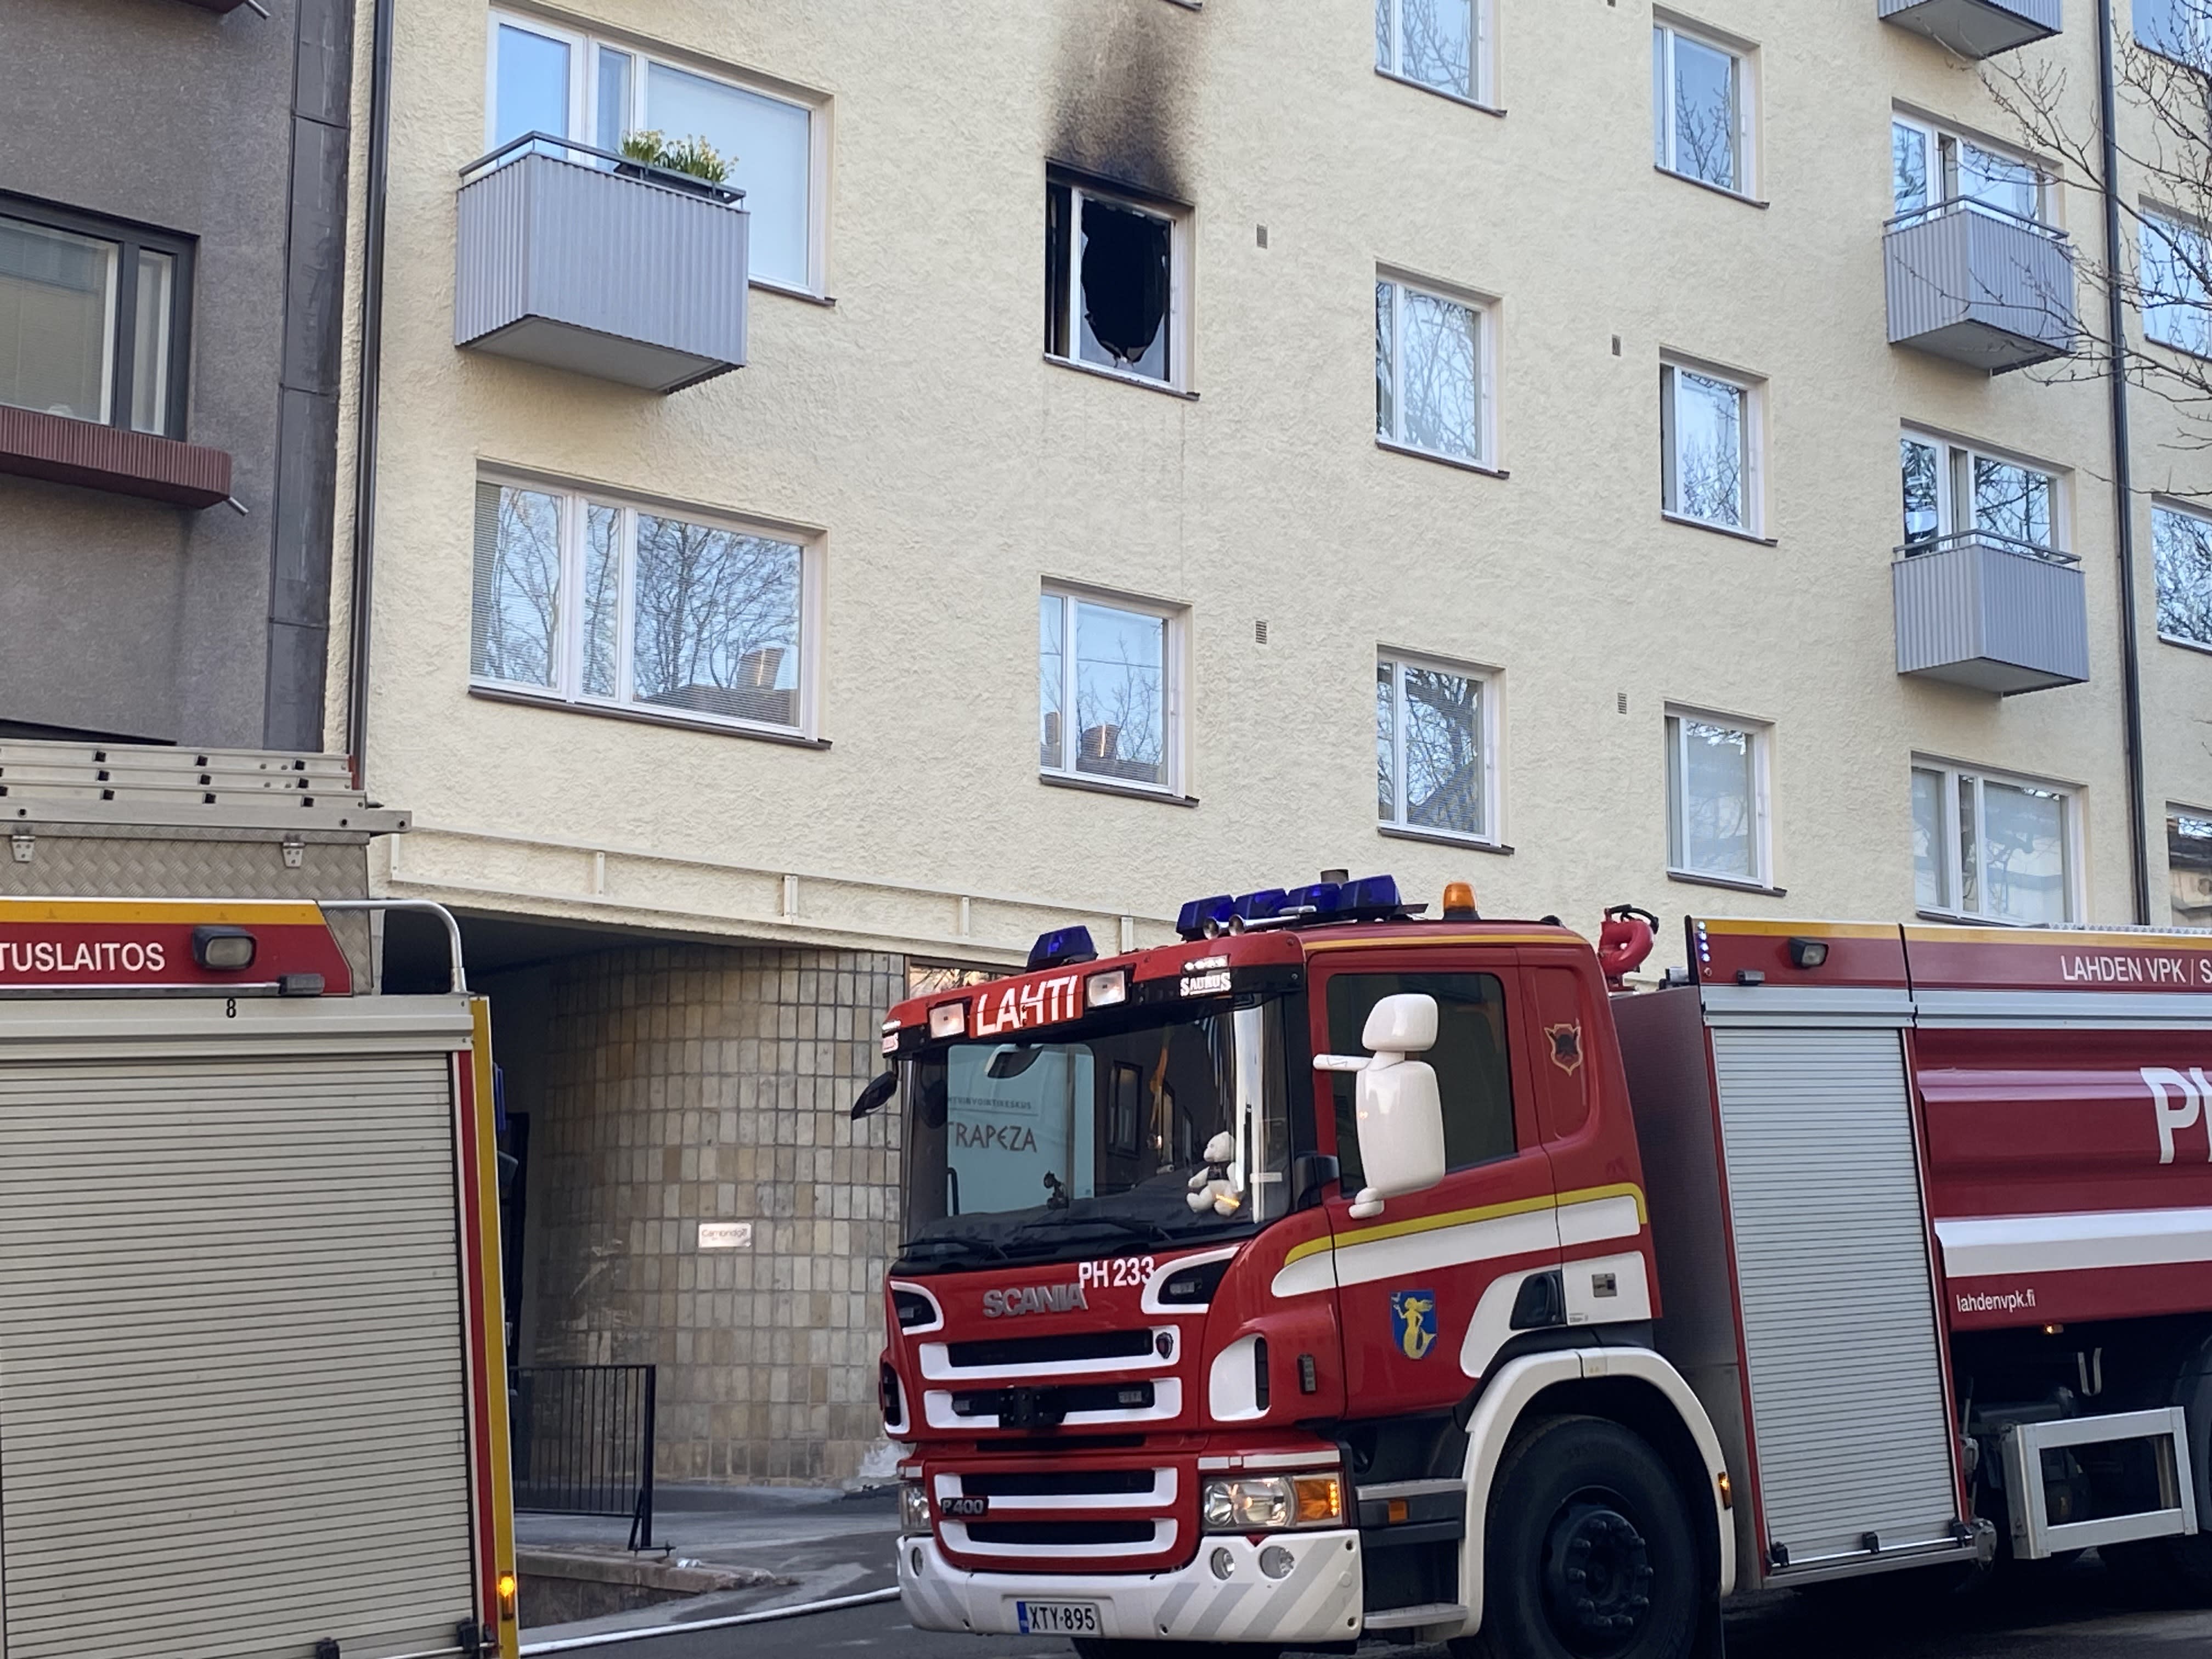 Kuusi was hospitalized after the fire in Lahti;  Suspected arson in the Hämeenlinna school fire